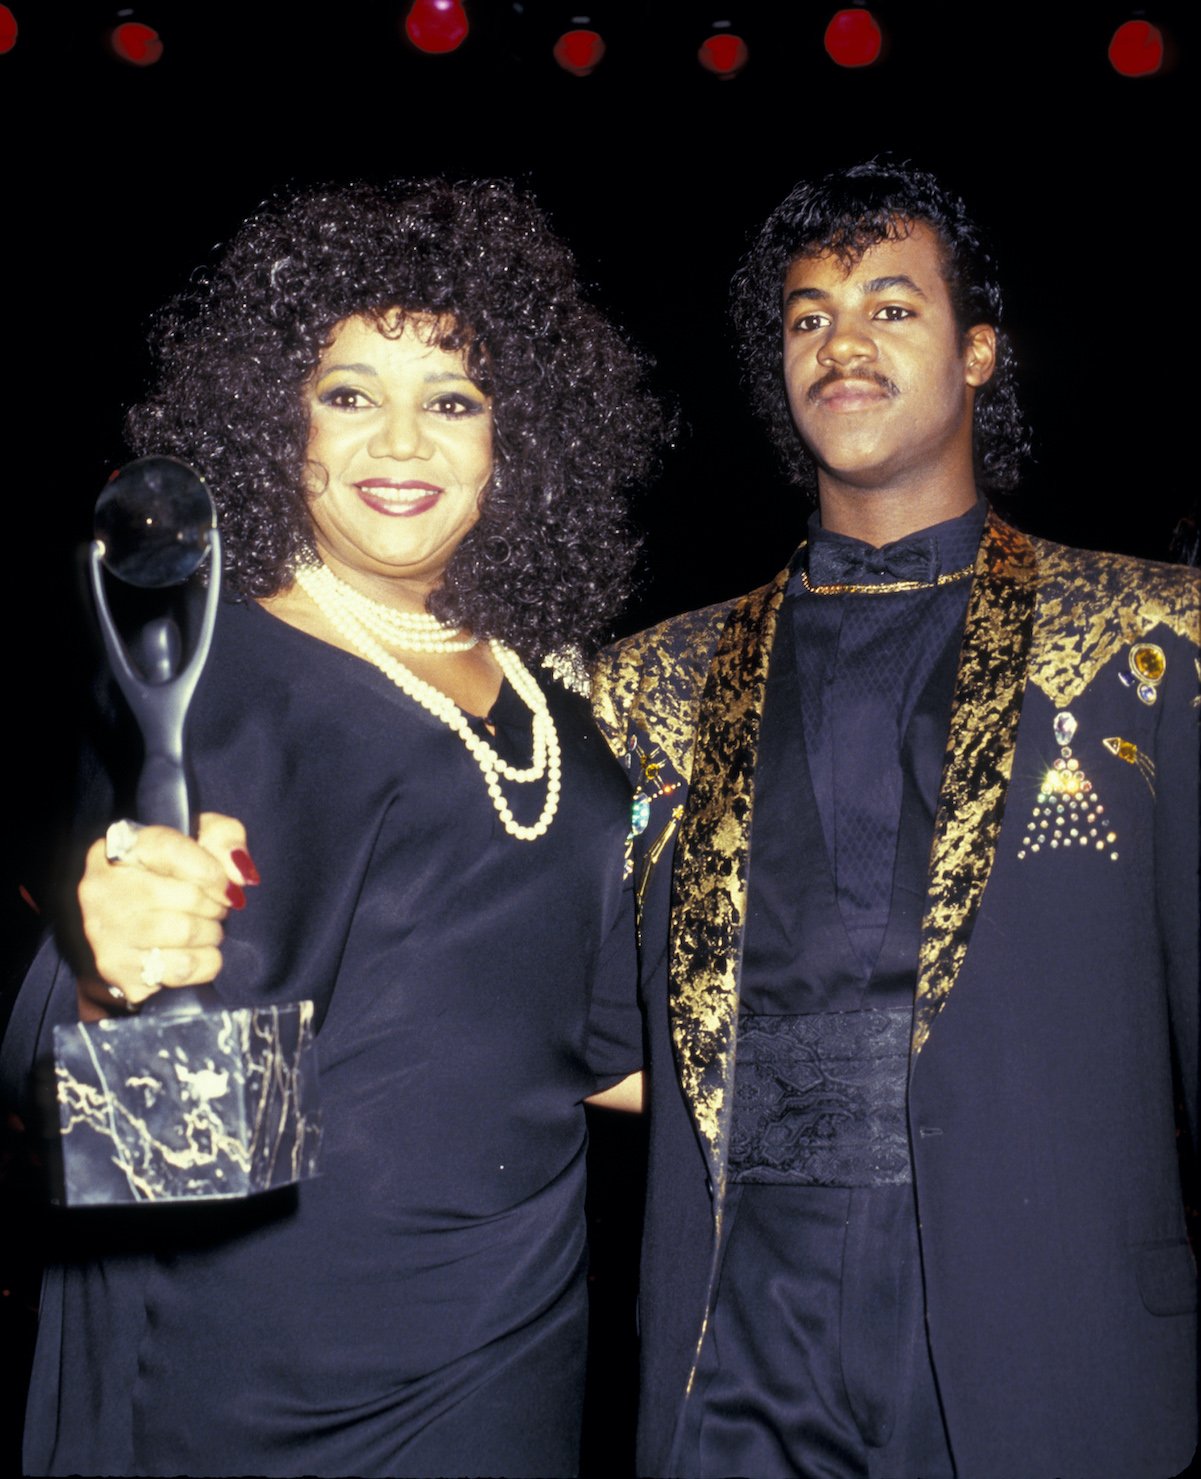 Anna Gordy Gaye and her son, Marvin Gaye III, in 1987